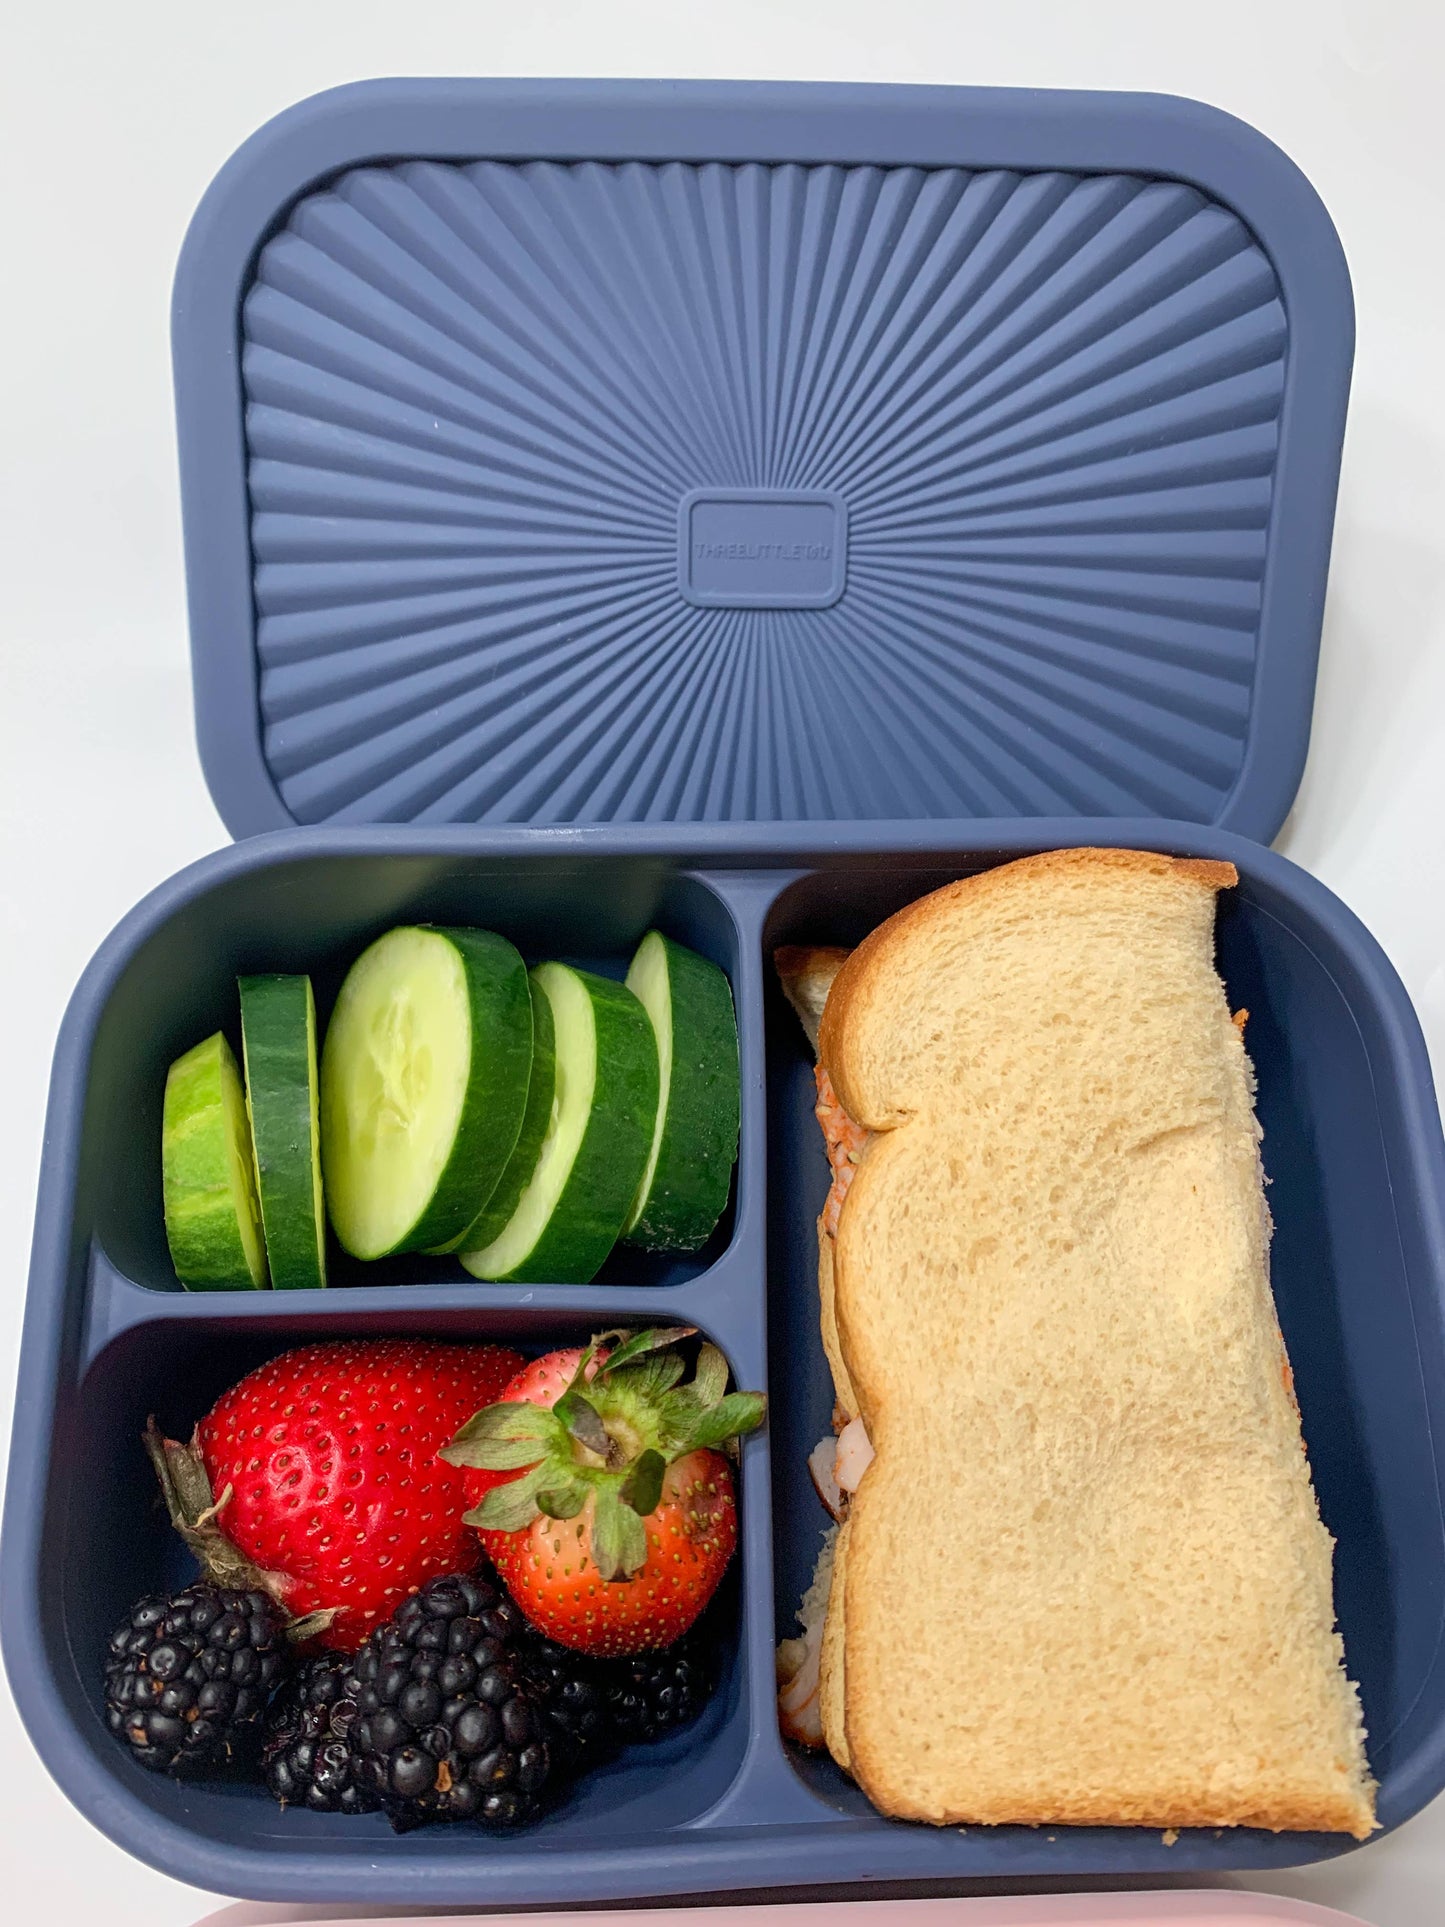 Dusty Blue Silicone Bento Lunch & Snack Box